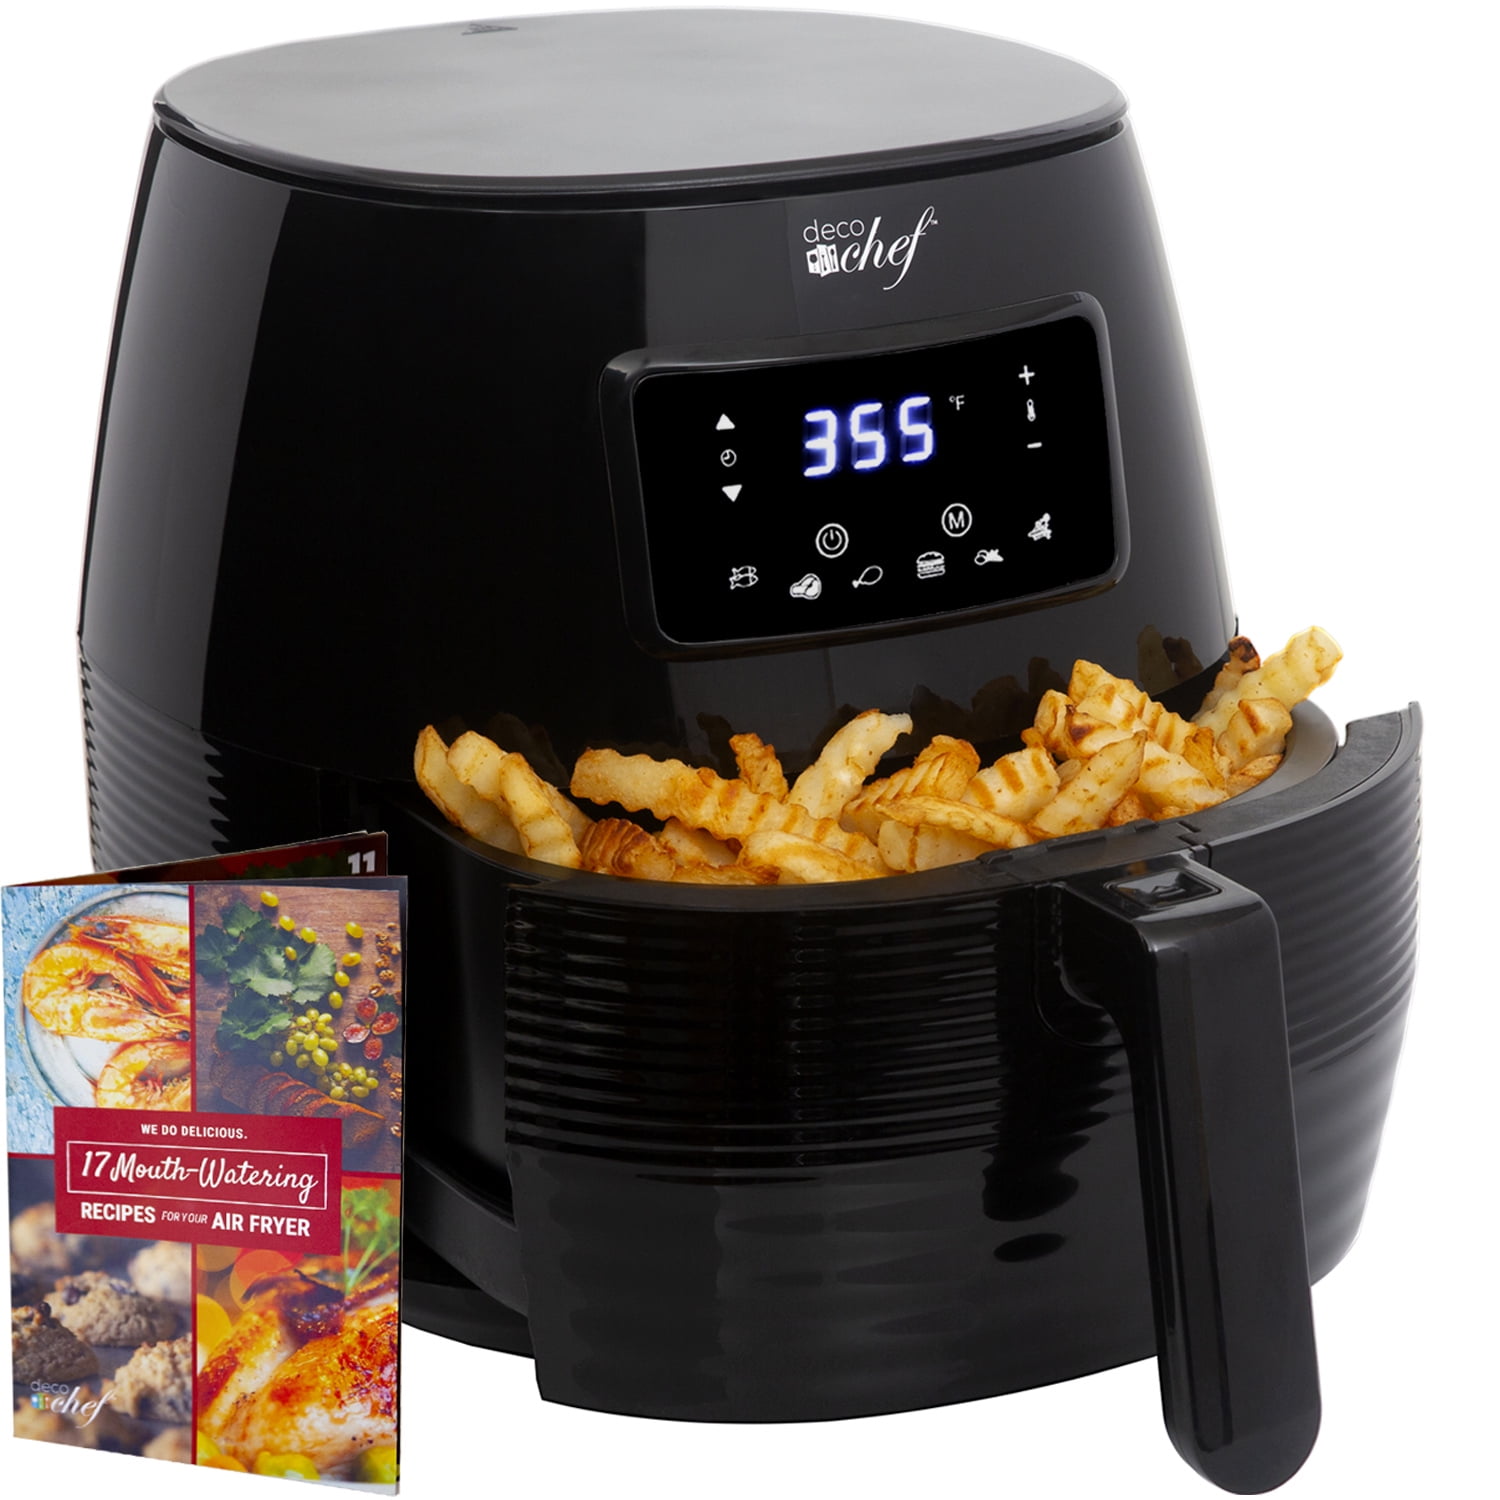 Useful Accessories for Your Air Fryer - THE SUGAR FREE DIVA